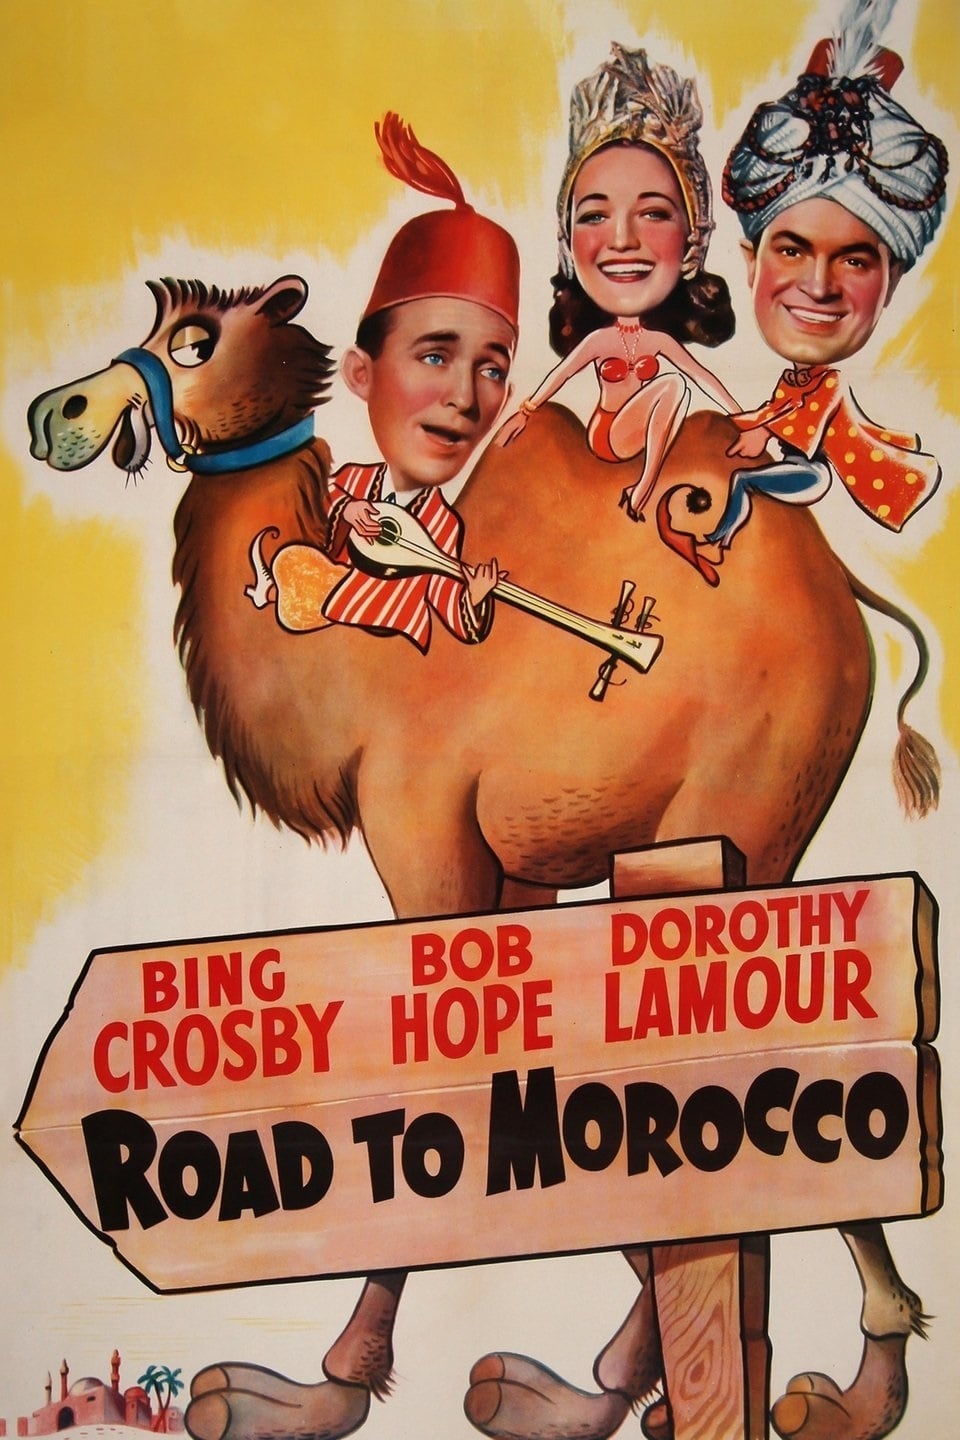 Road to Morocco